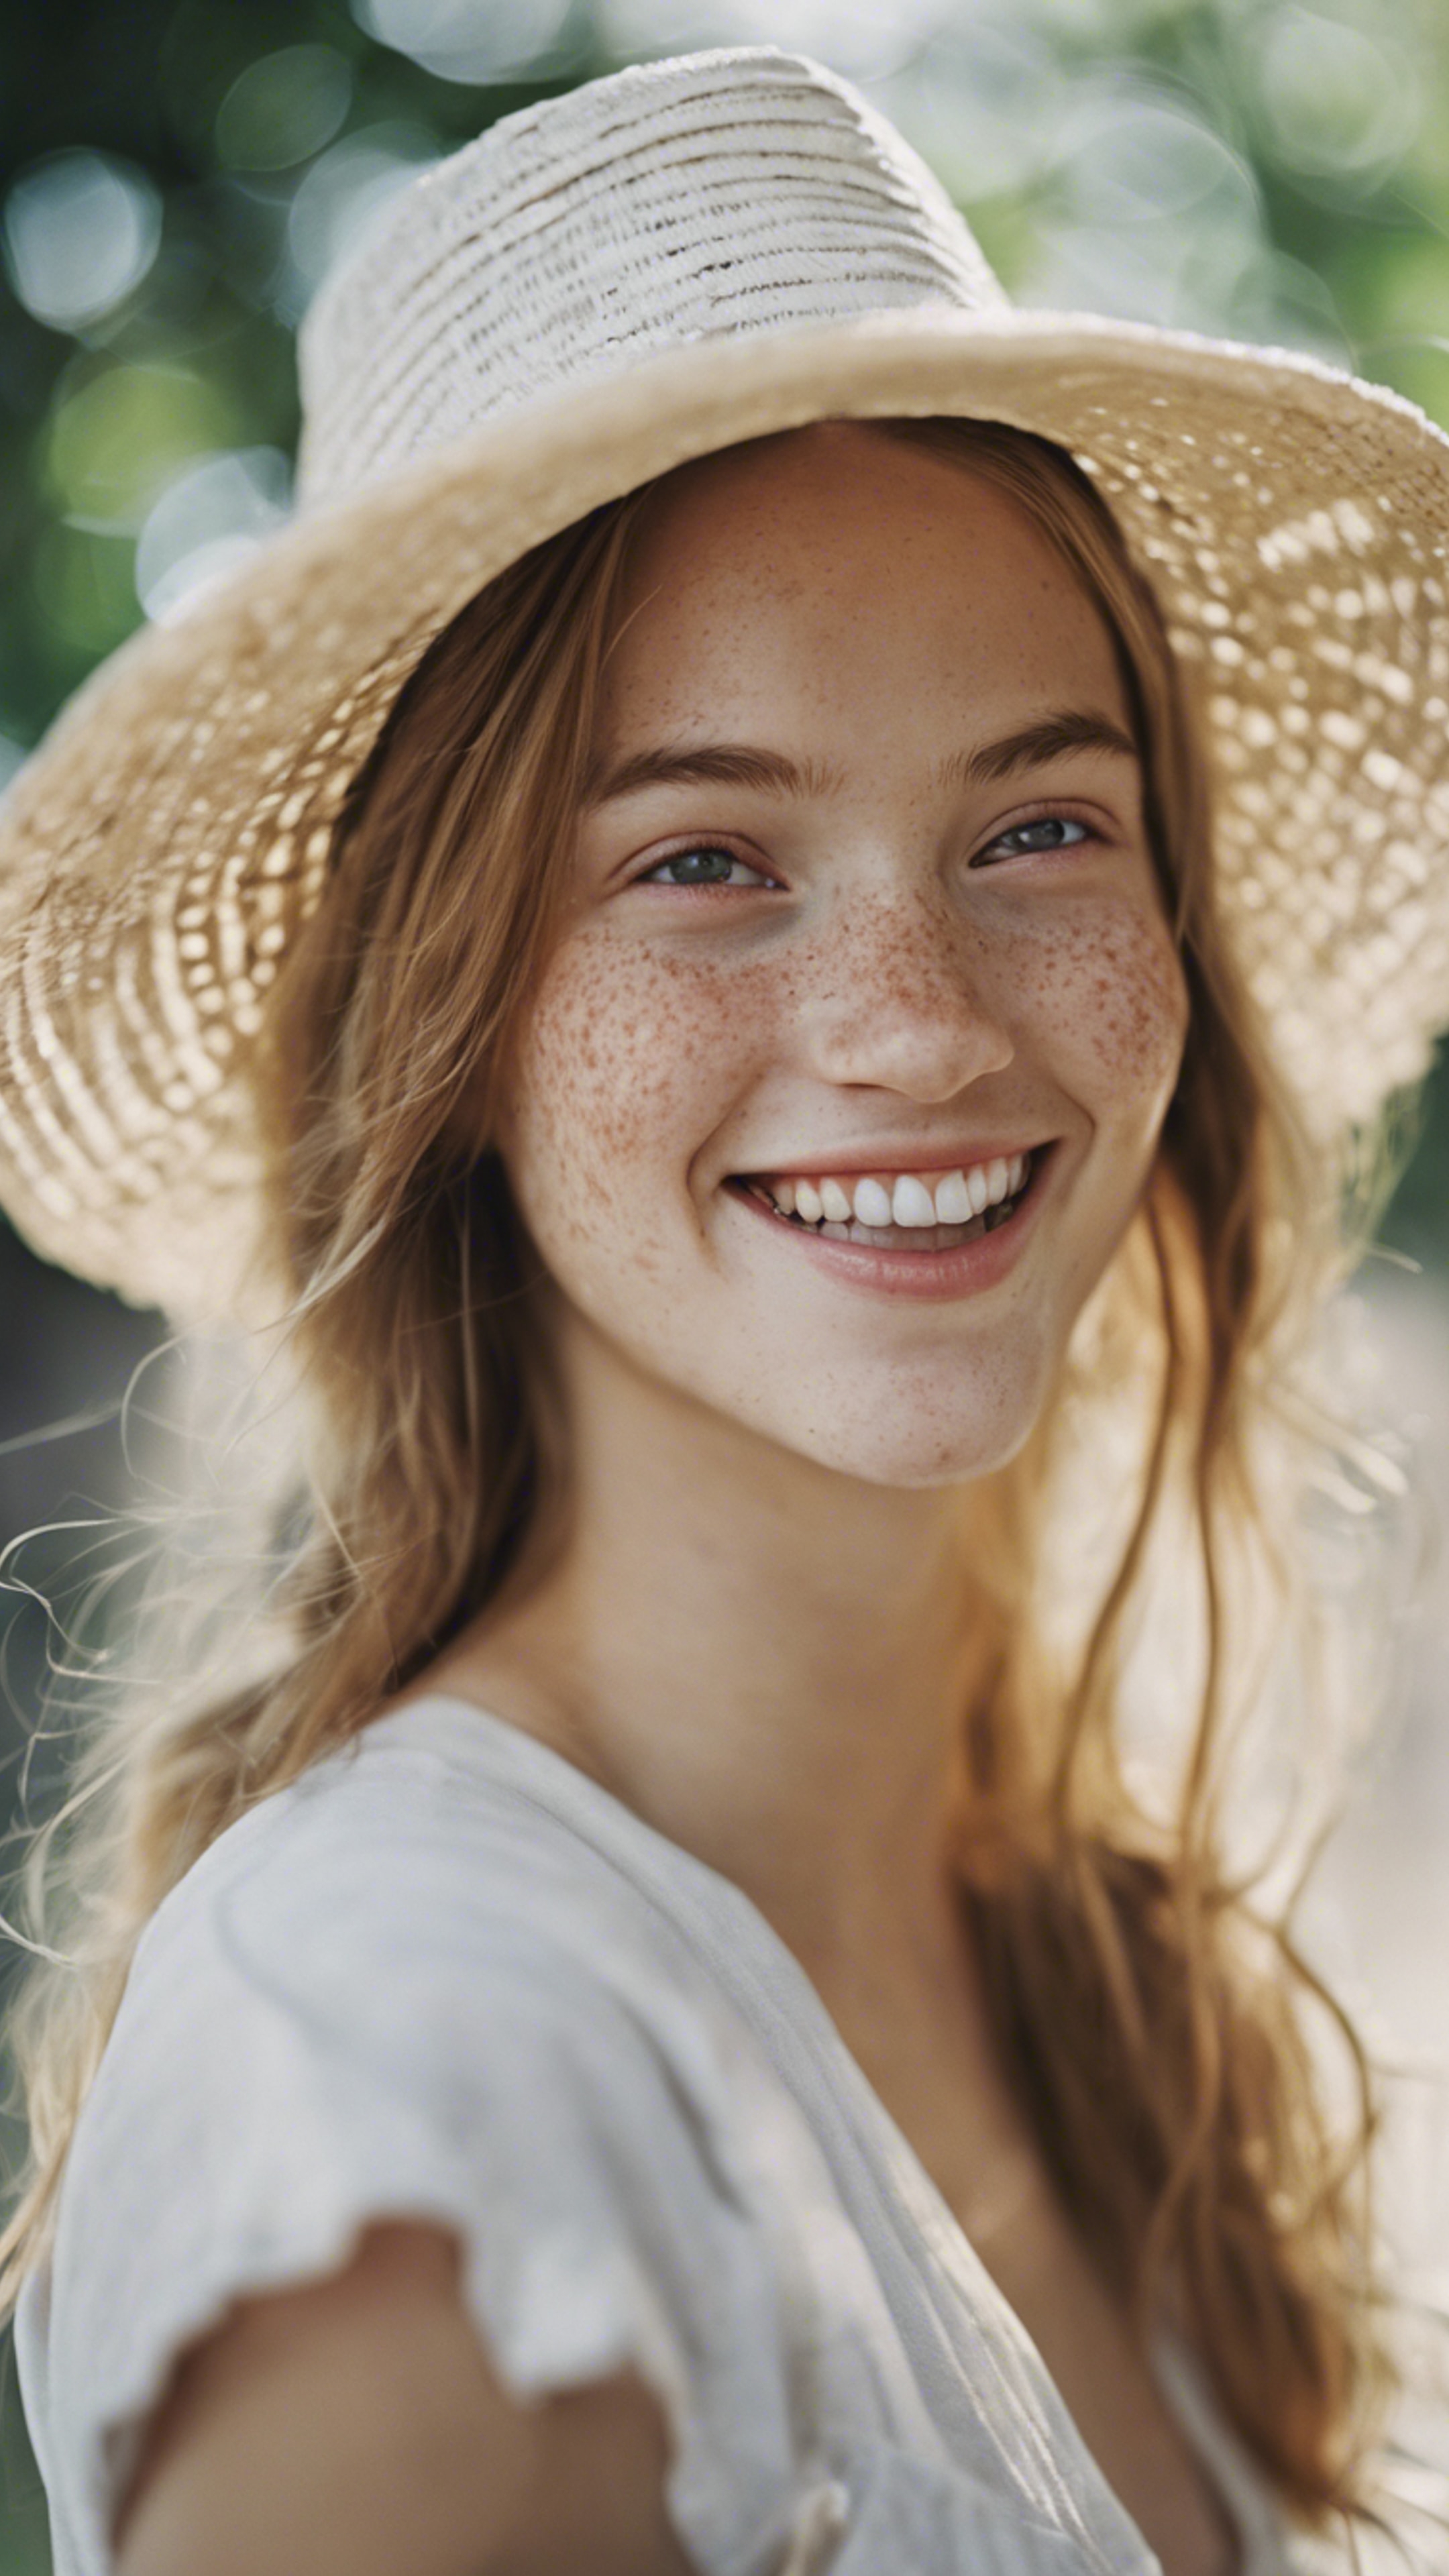 A portrait of a cute girl with freckles and a big smile, wearing a white straw hat. Обои[344e43c9fe594ea98e55]